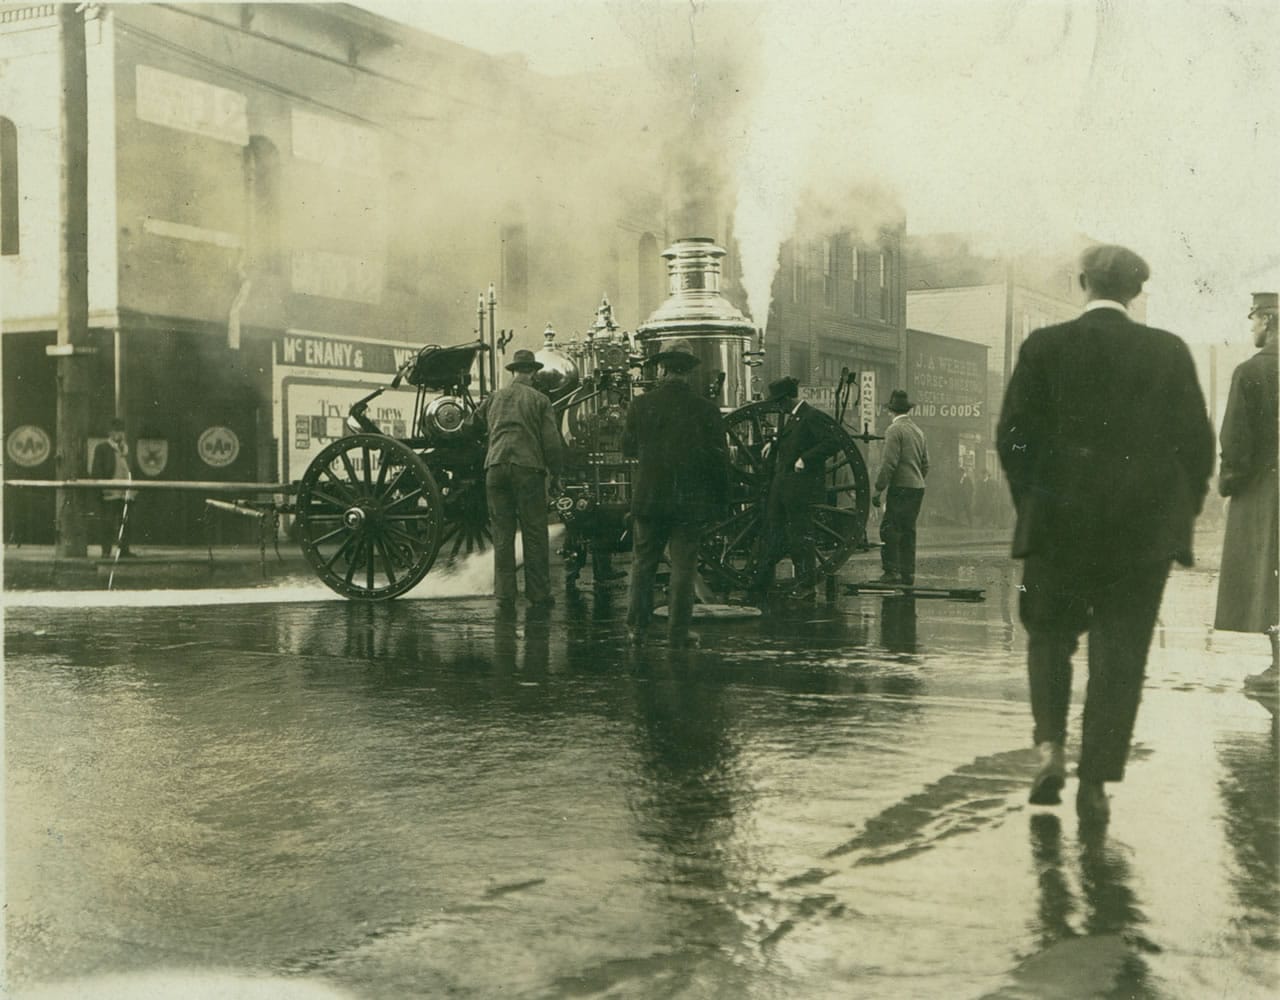 A massive fire at an old and untended building burnt down in 1913.